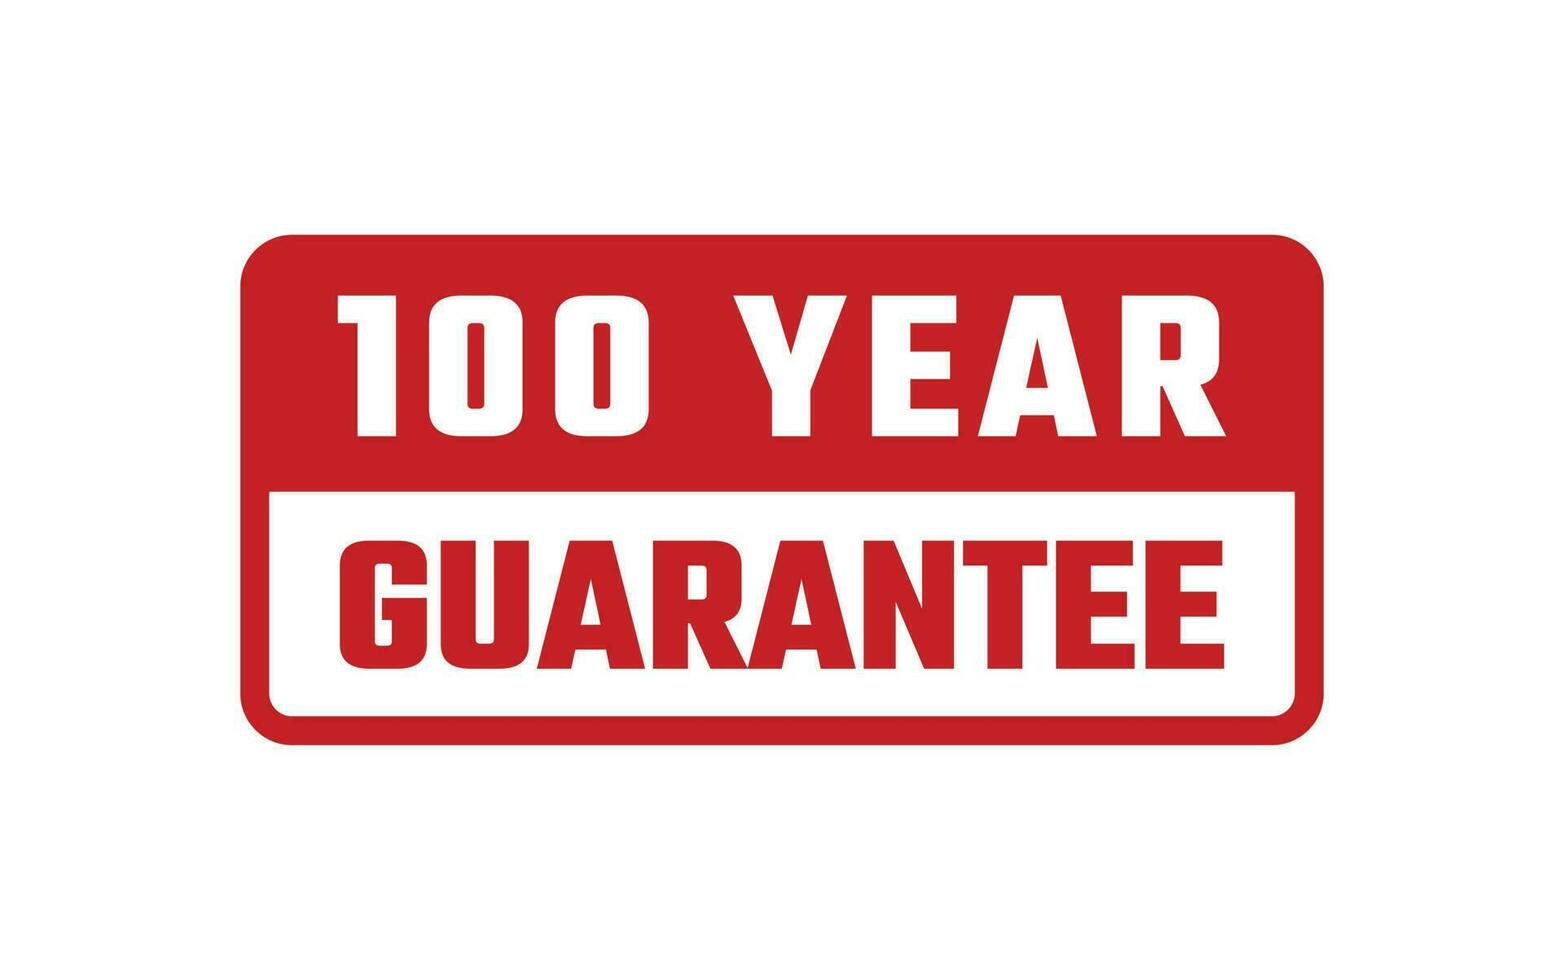 100 Year Guarantee Rubber Stamp vector